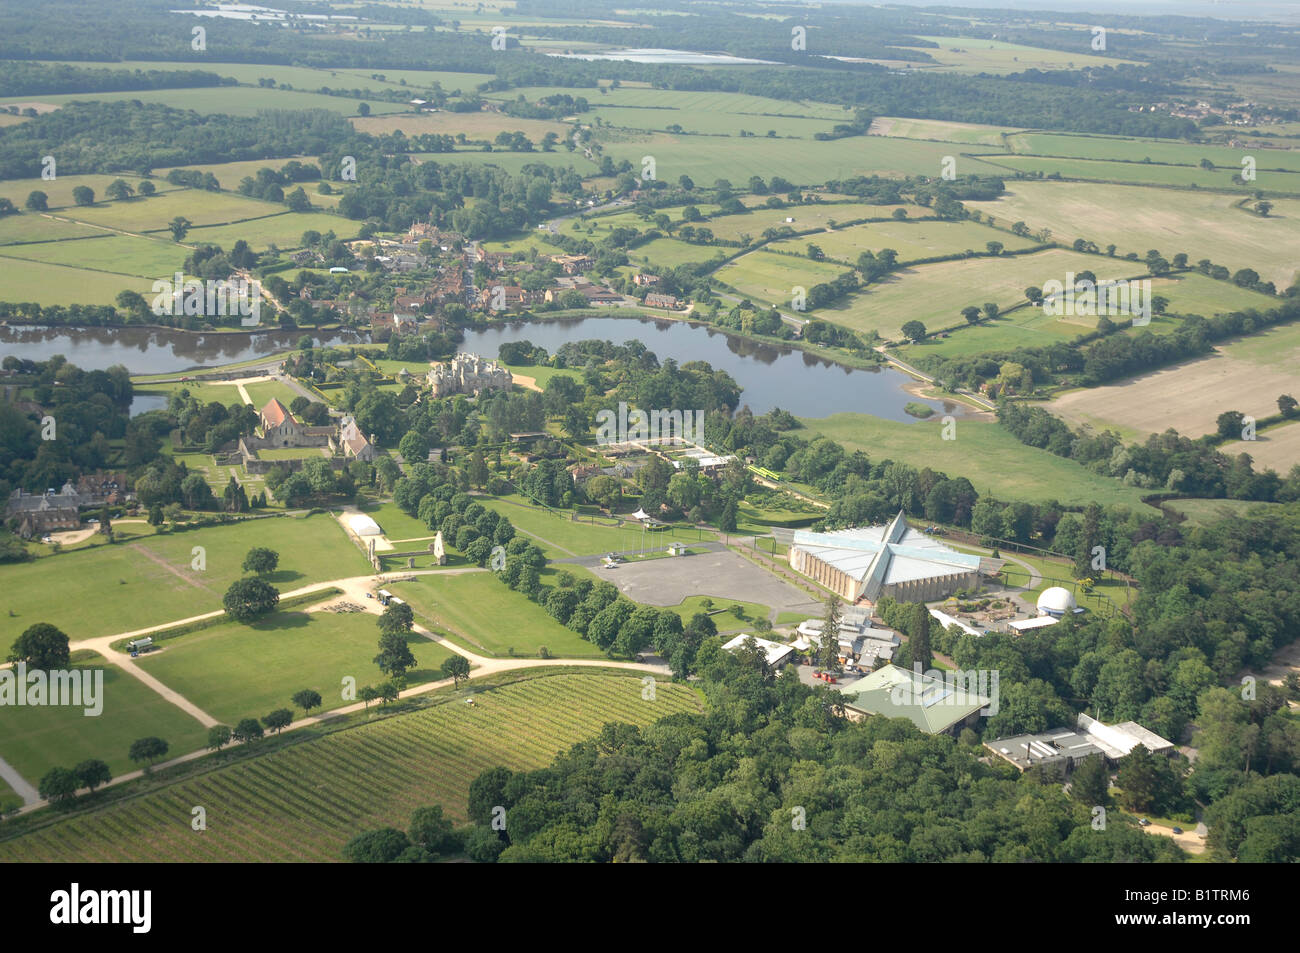 Aerial view of Beaulieu in the New Forest, showing National Motor Museum and Palace house and grounds. Stock Photo